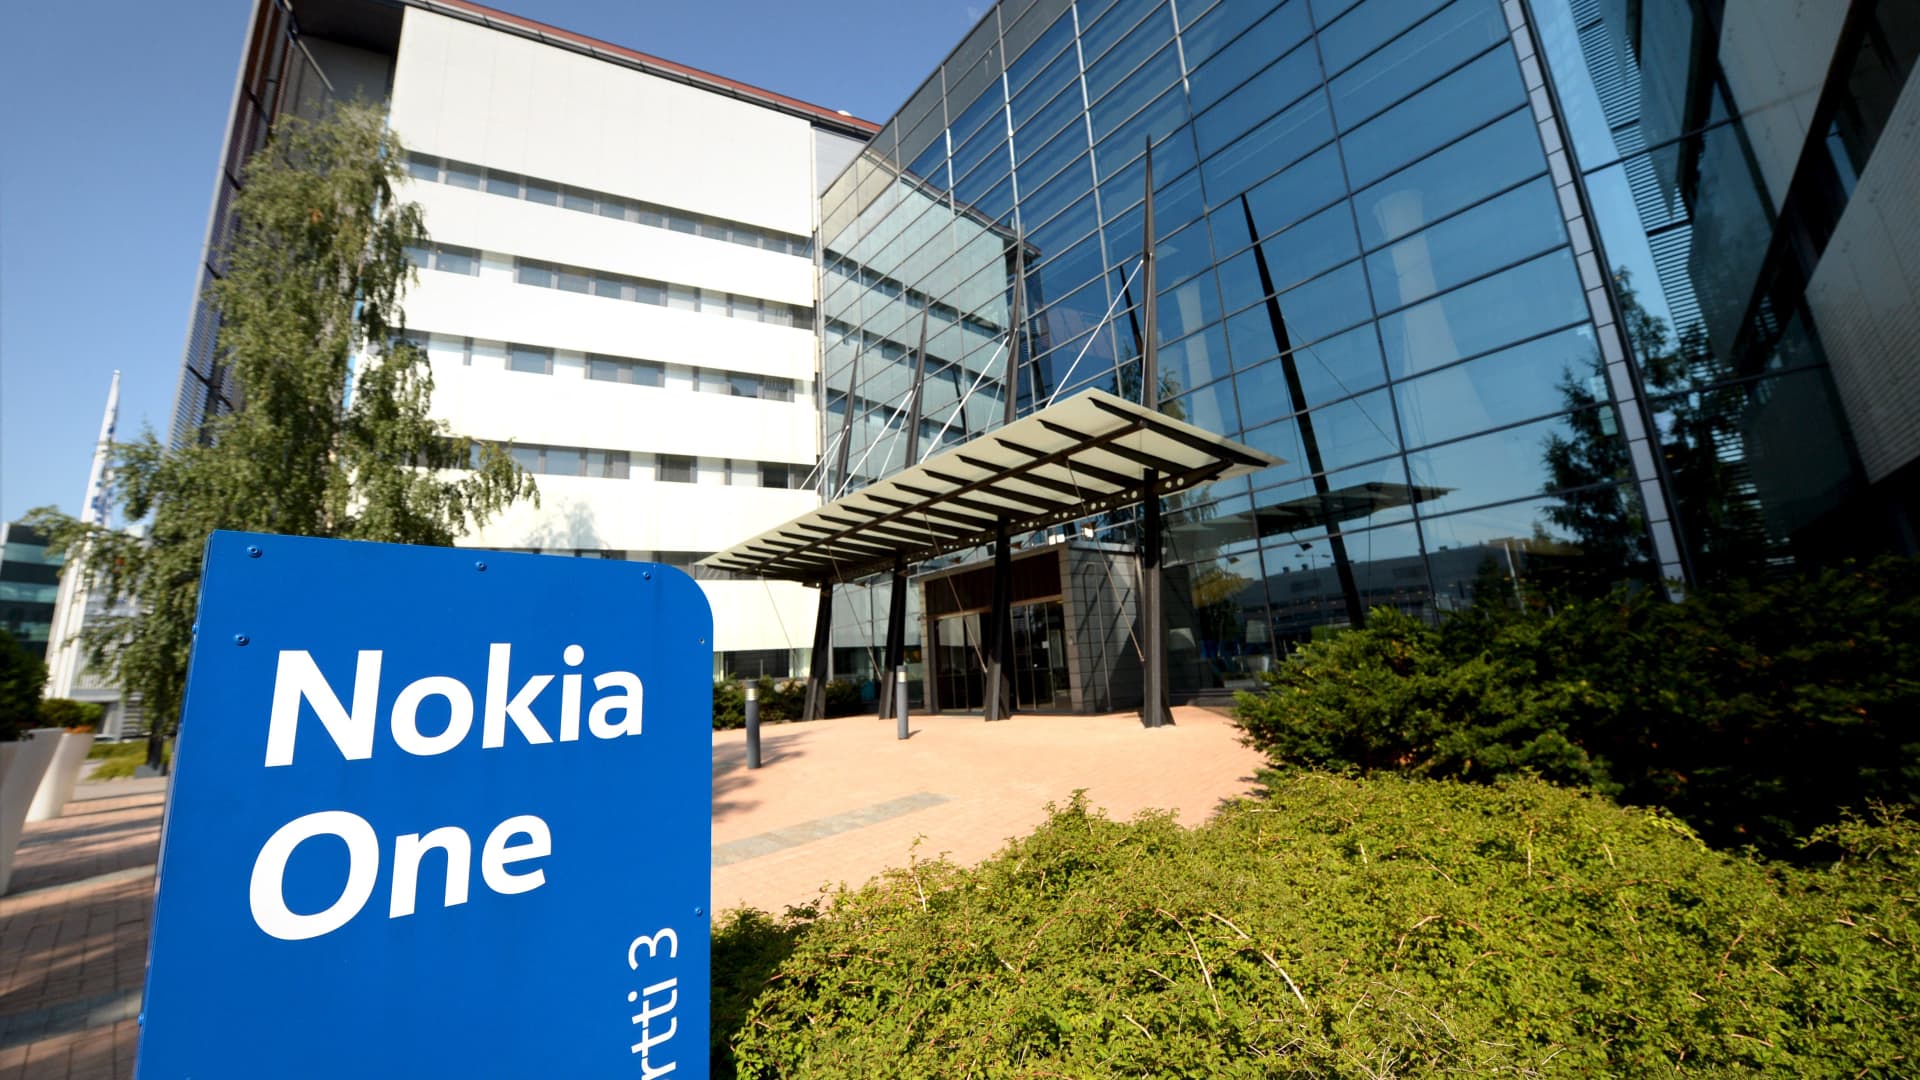 A picture taken on July 26, 2018 shows a view of the headquarters of Finnish telecoms giant Nokia in Espoo, Finland.